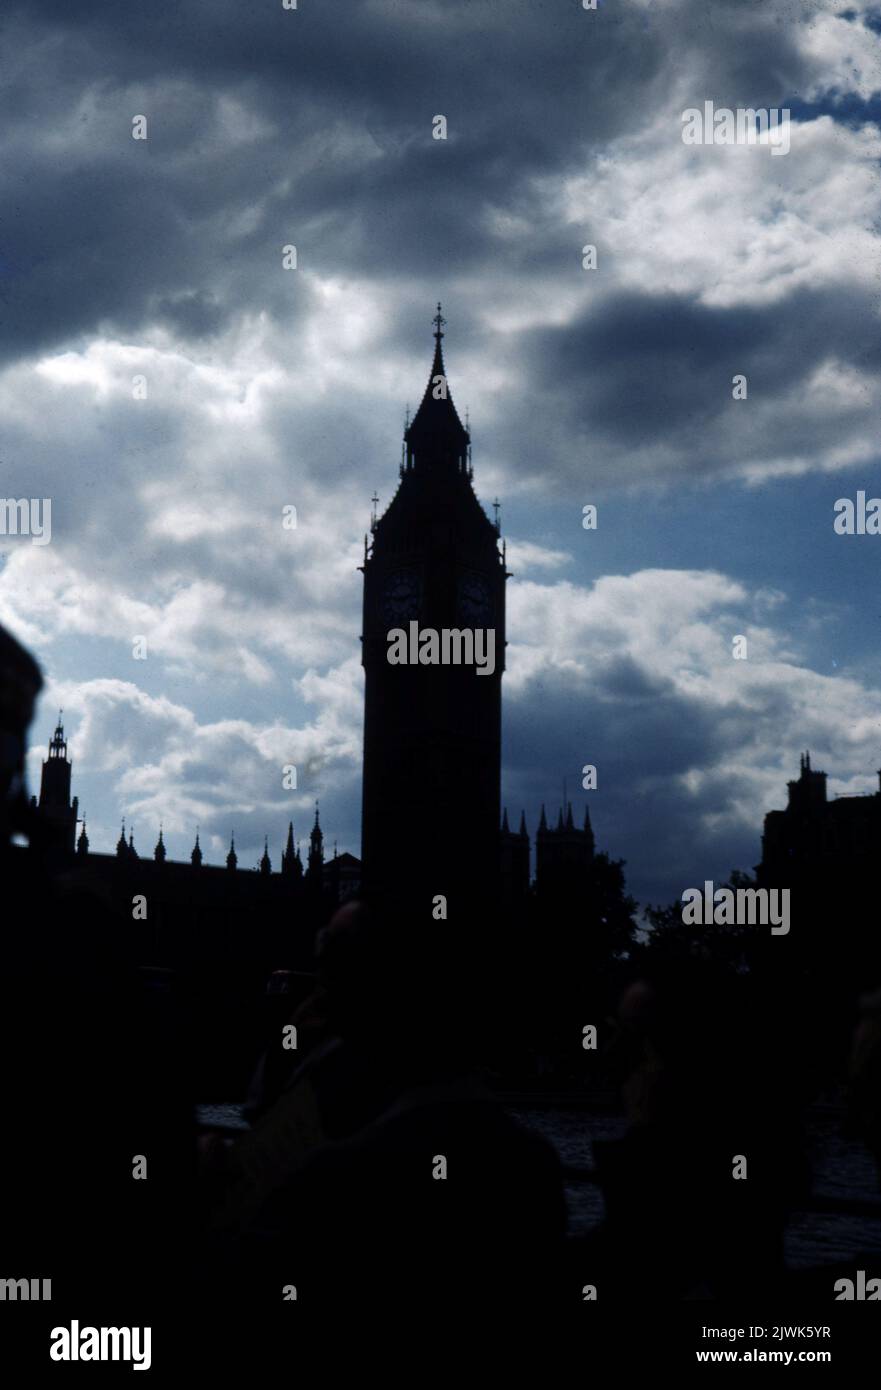 Big Ben Houses of Parliament, London England Photo by Tony Henshaw Archive Stock Photo